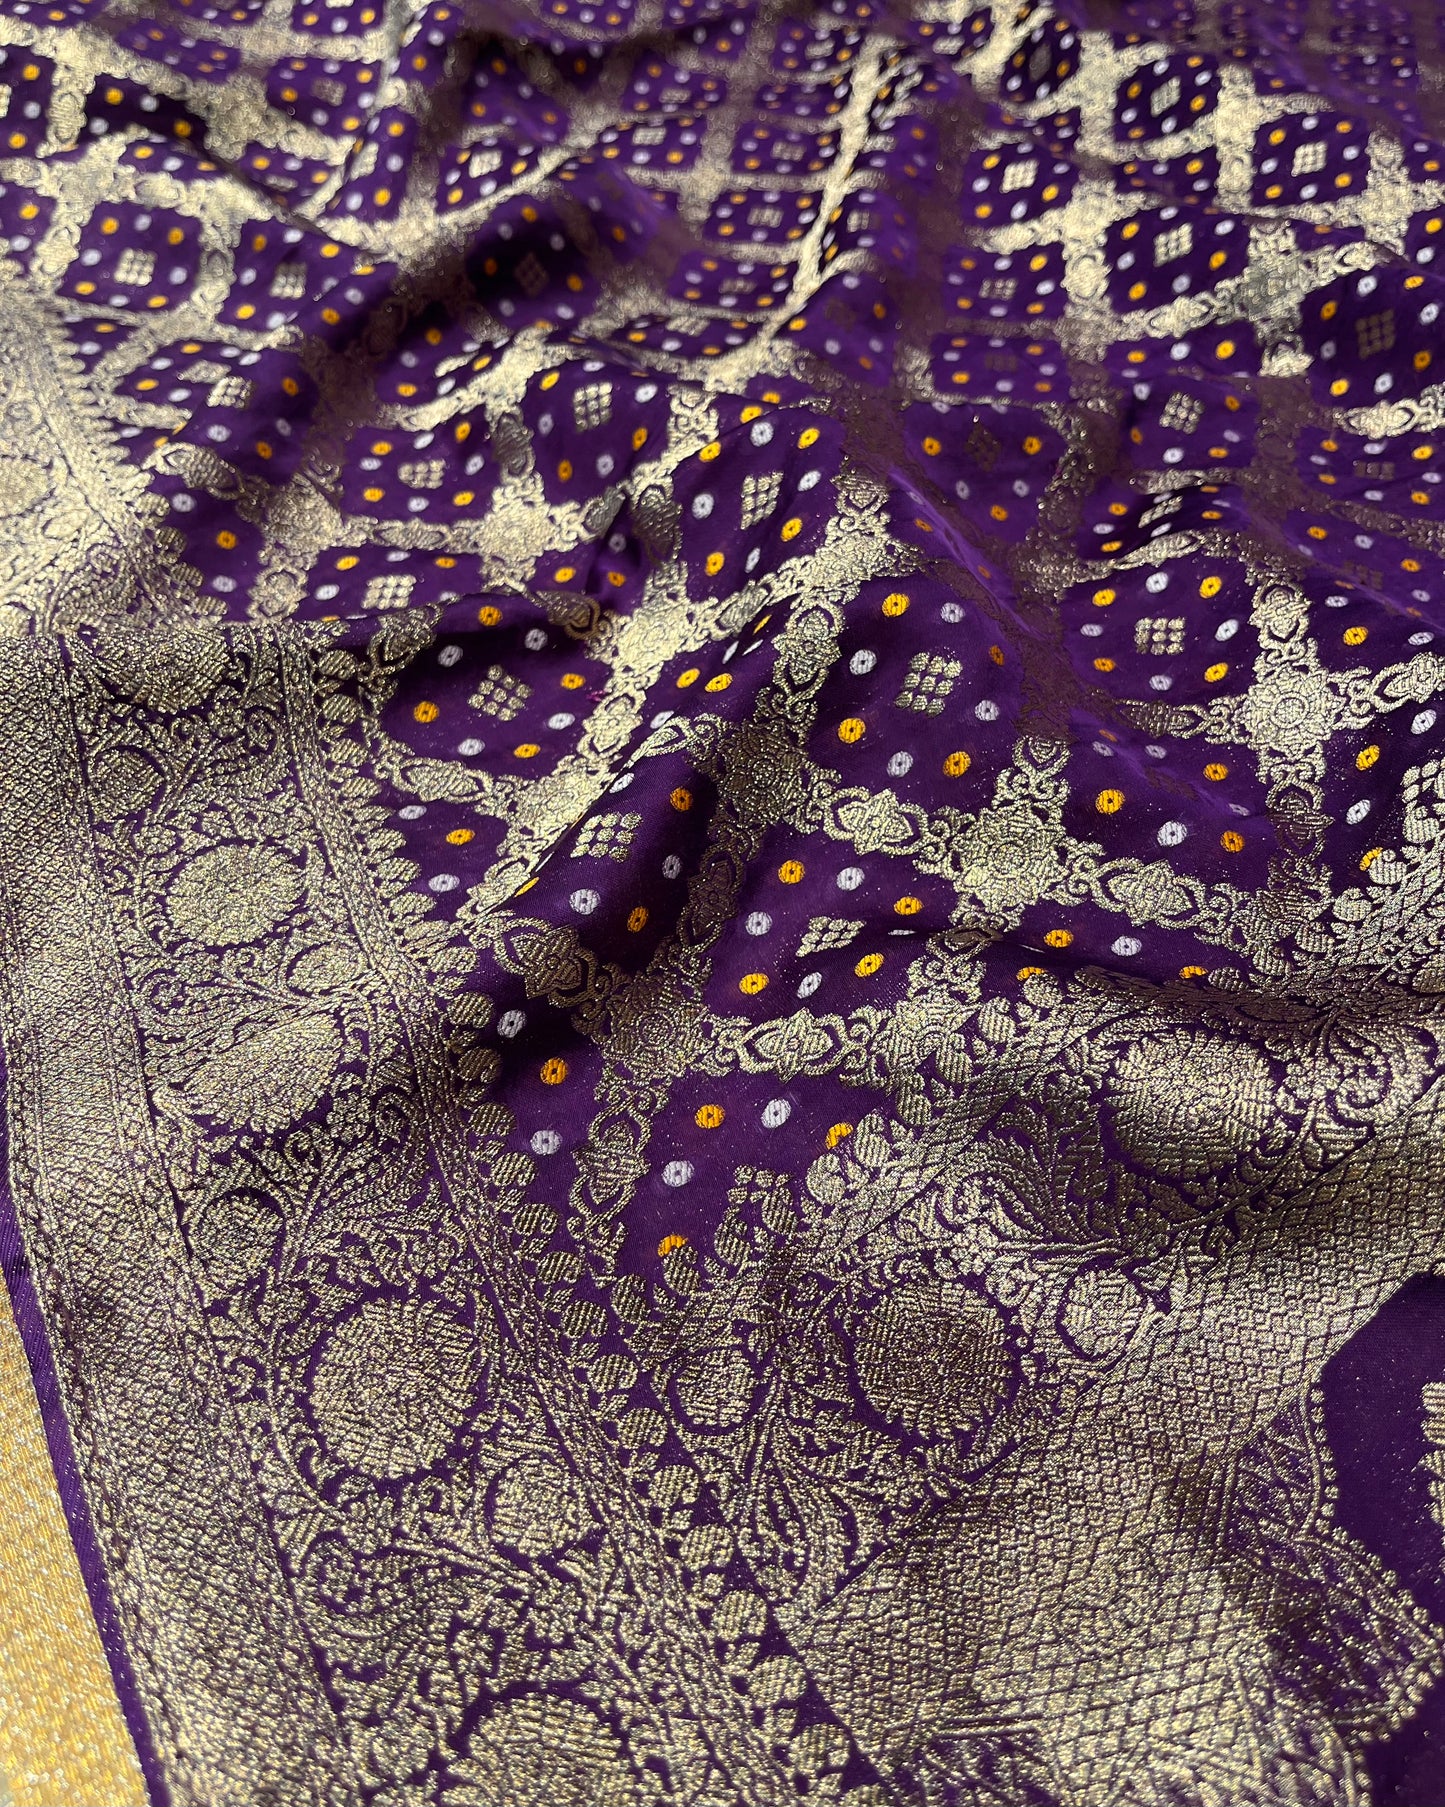 ( DELIVERY IN 25 DAYS ) PURPLE COLOUR SATIN ORGANZA GHARCHOLA BANDHANI SAREE EMBELLISHED WOTH ZARI WEAVES